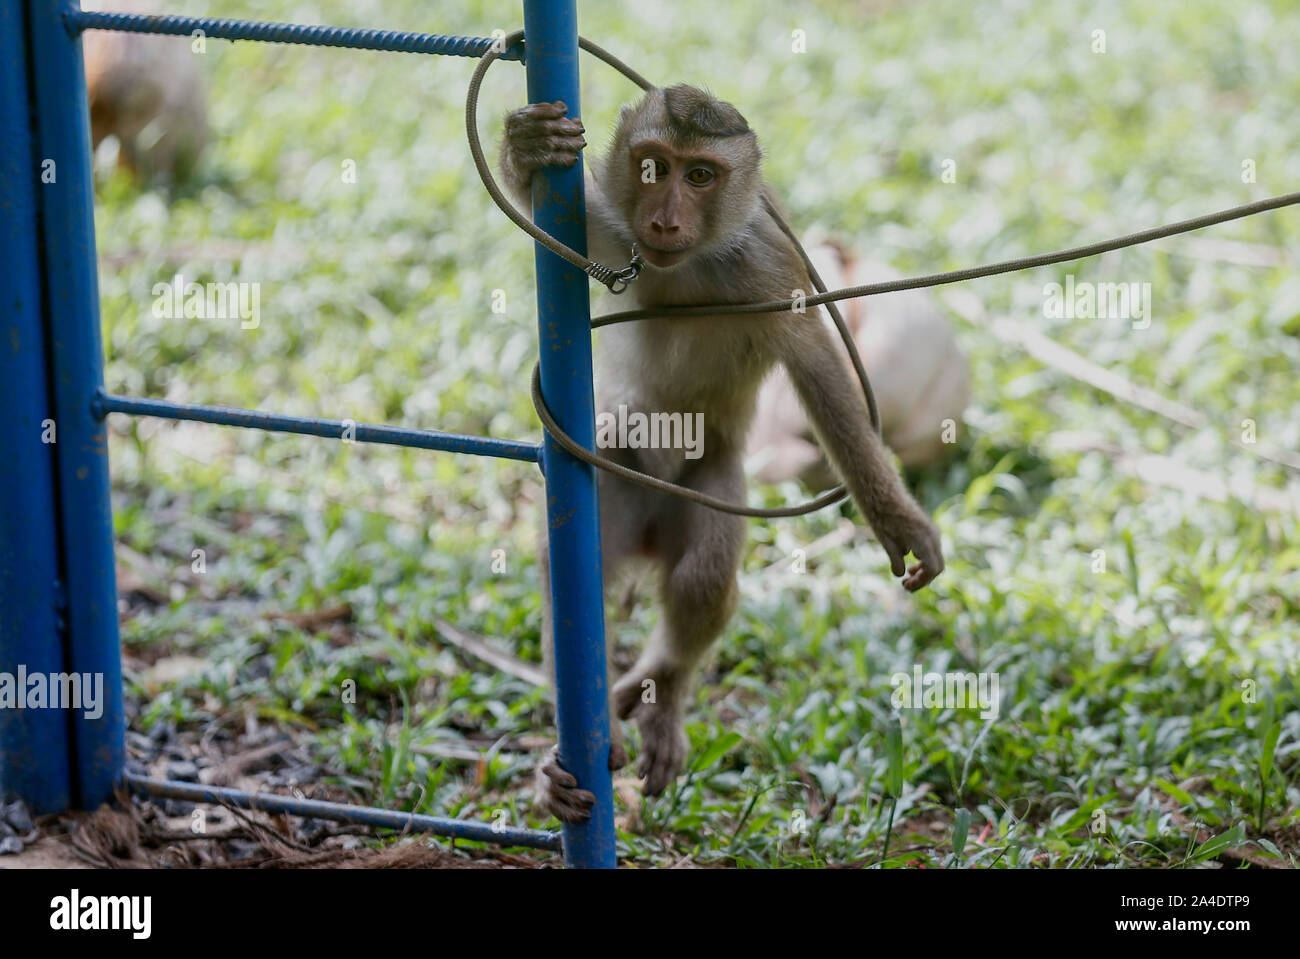 A monkey learns to solve a rope around itself during a training session of collecting coconuts for agriculture at the monkey school in Surat Thani, south of Bangkok. Stock Photo